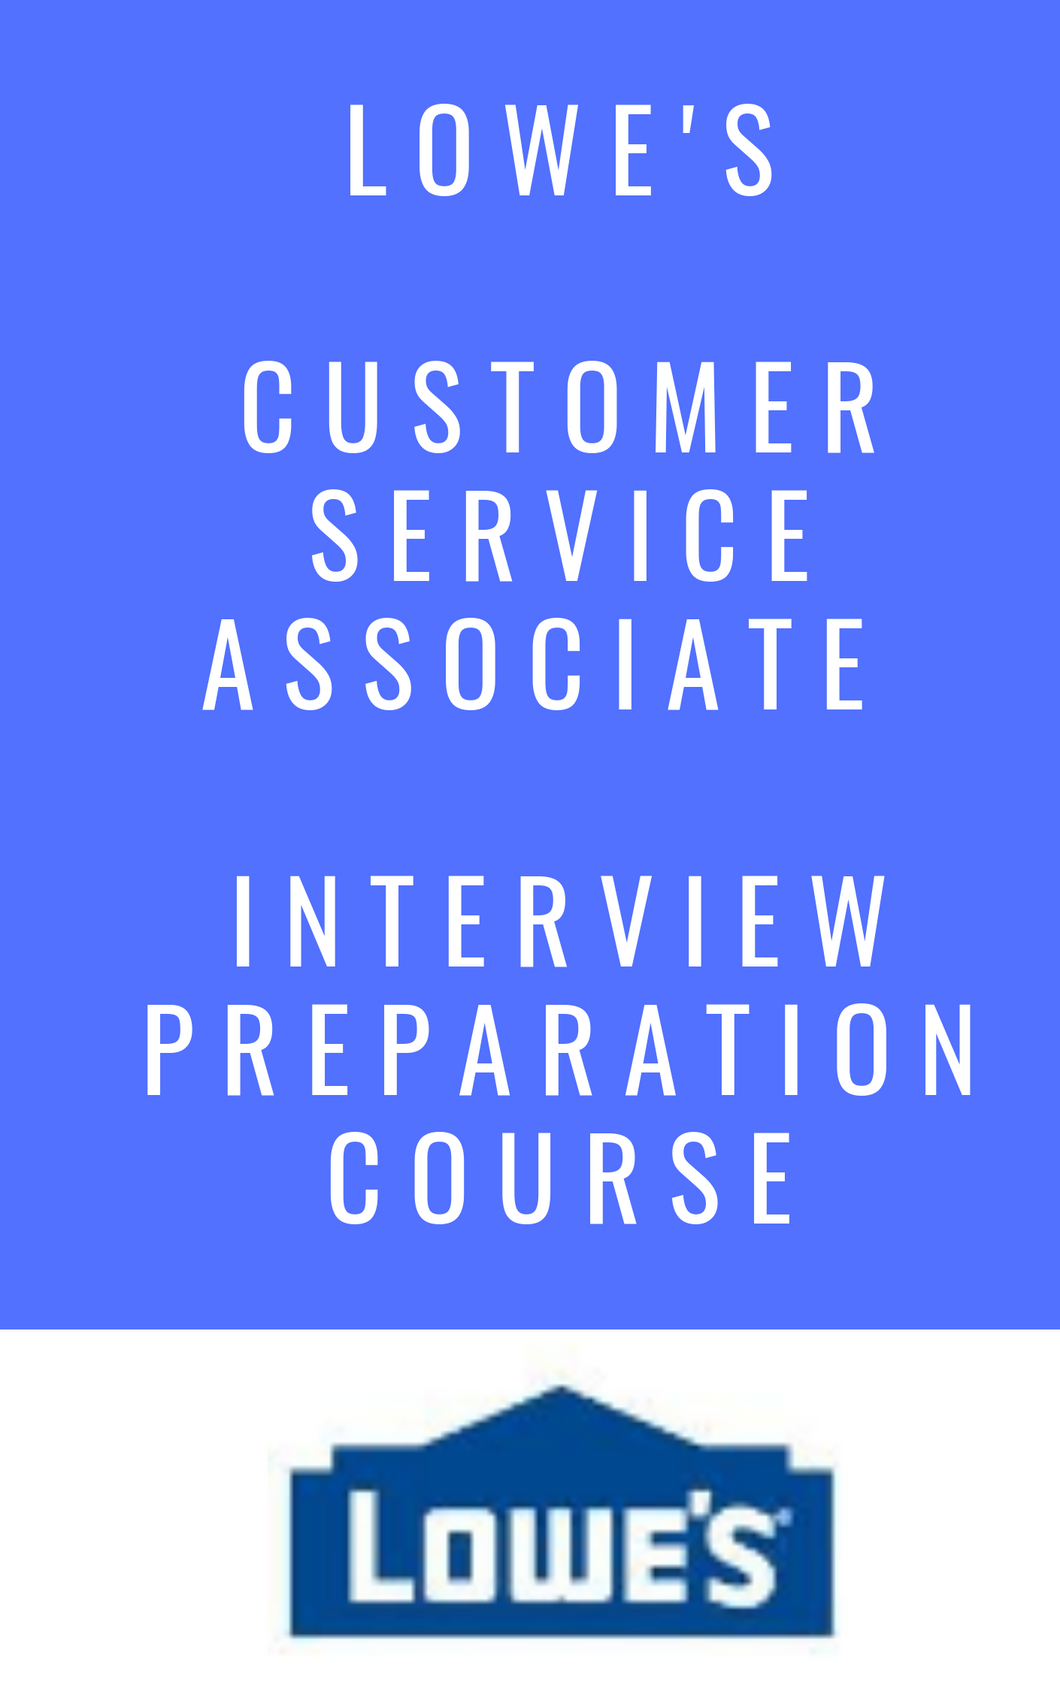 Lowes Customer Service Associate Interview Preparation Course With W Coursetake 2020